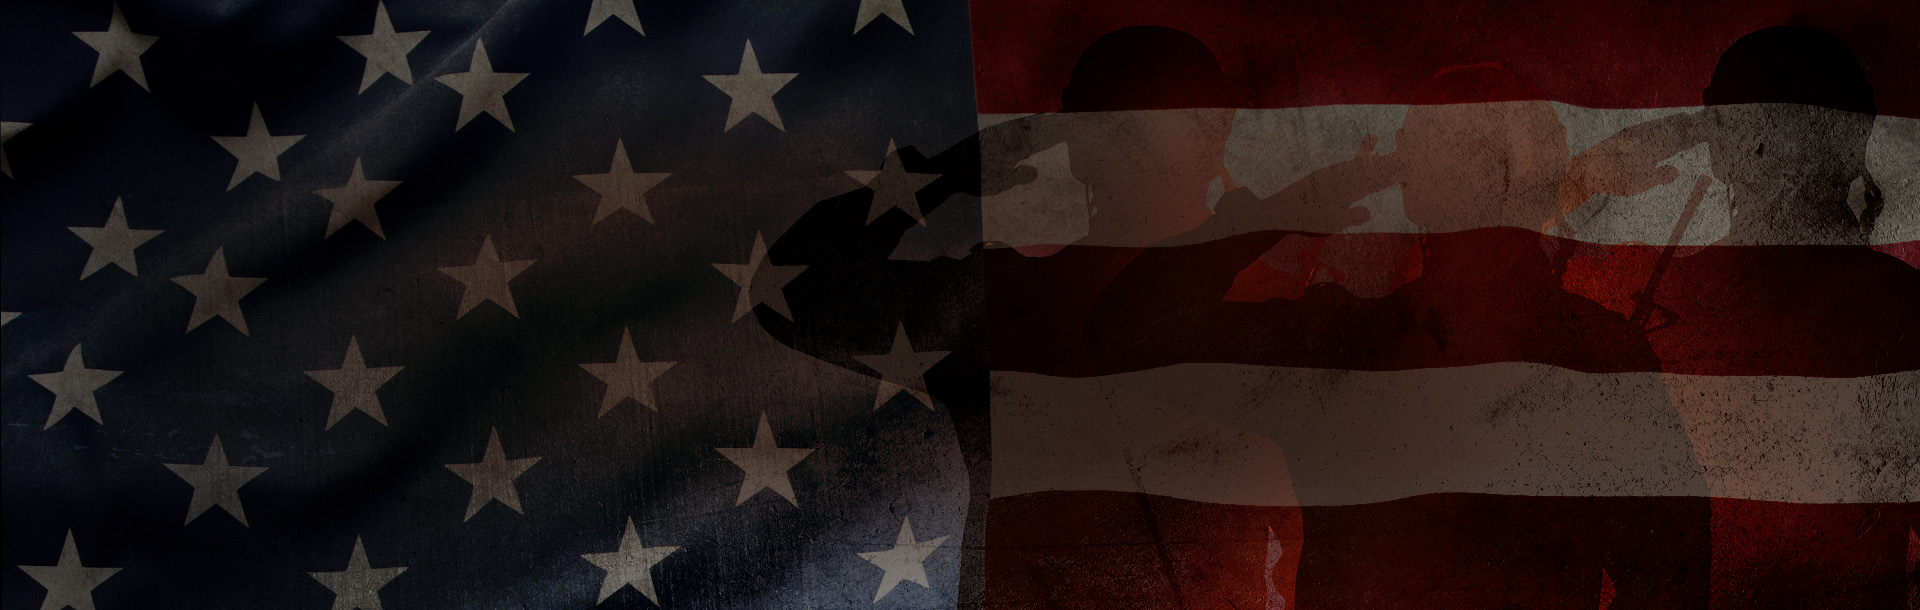 3339-Memorial-Day-High-Level-Site-Banners_HP_HeroCarousel_1920x610(1)